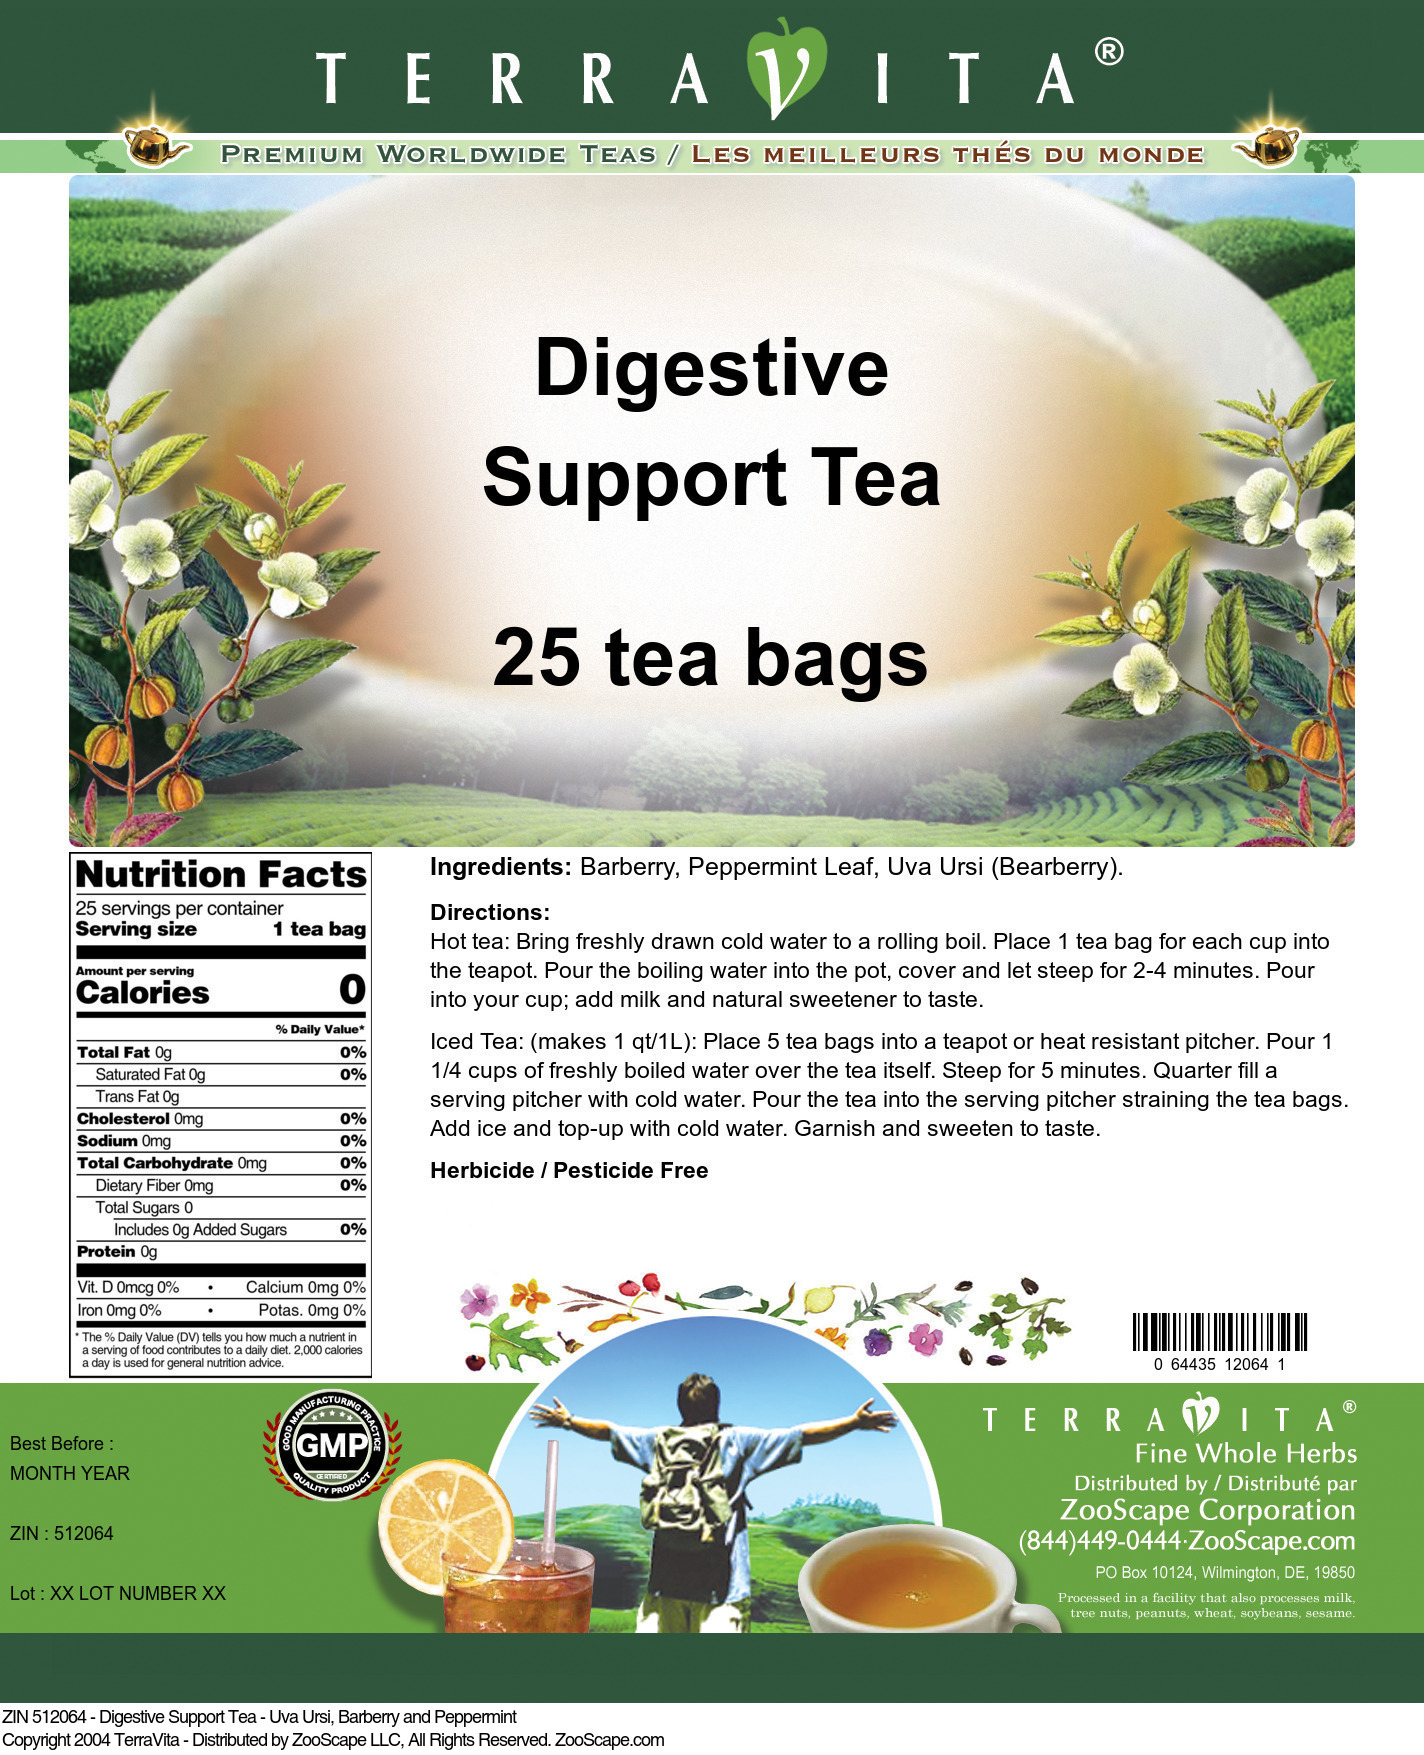 Digestive Support Tea - Uva Ursi, Barberry and Peppermint - Label